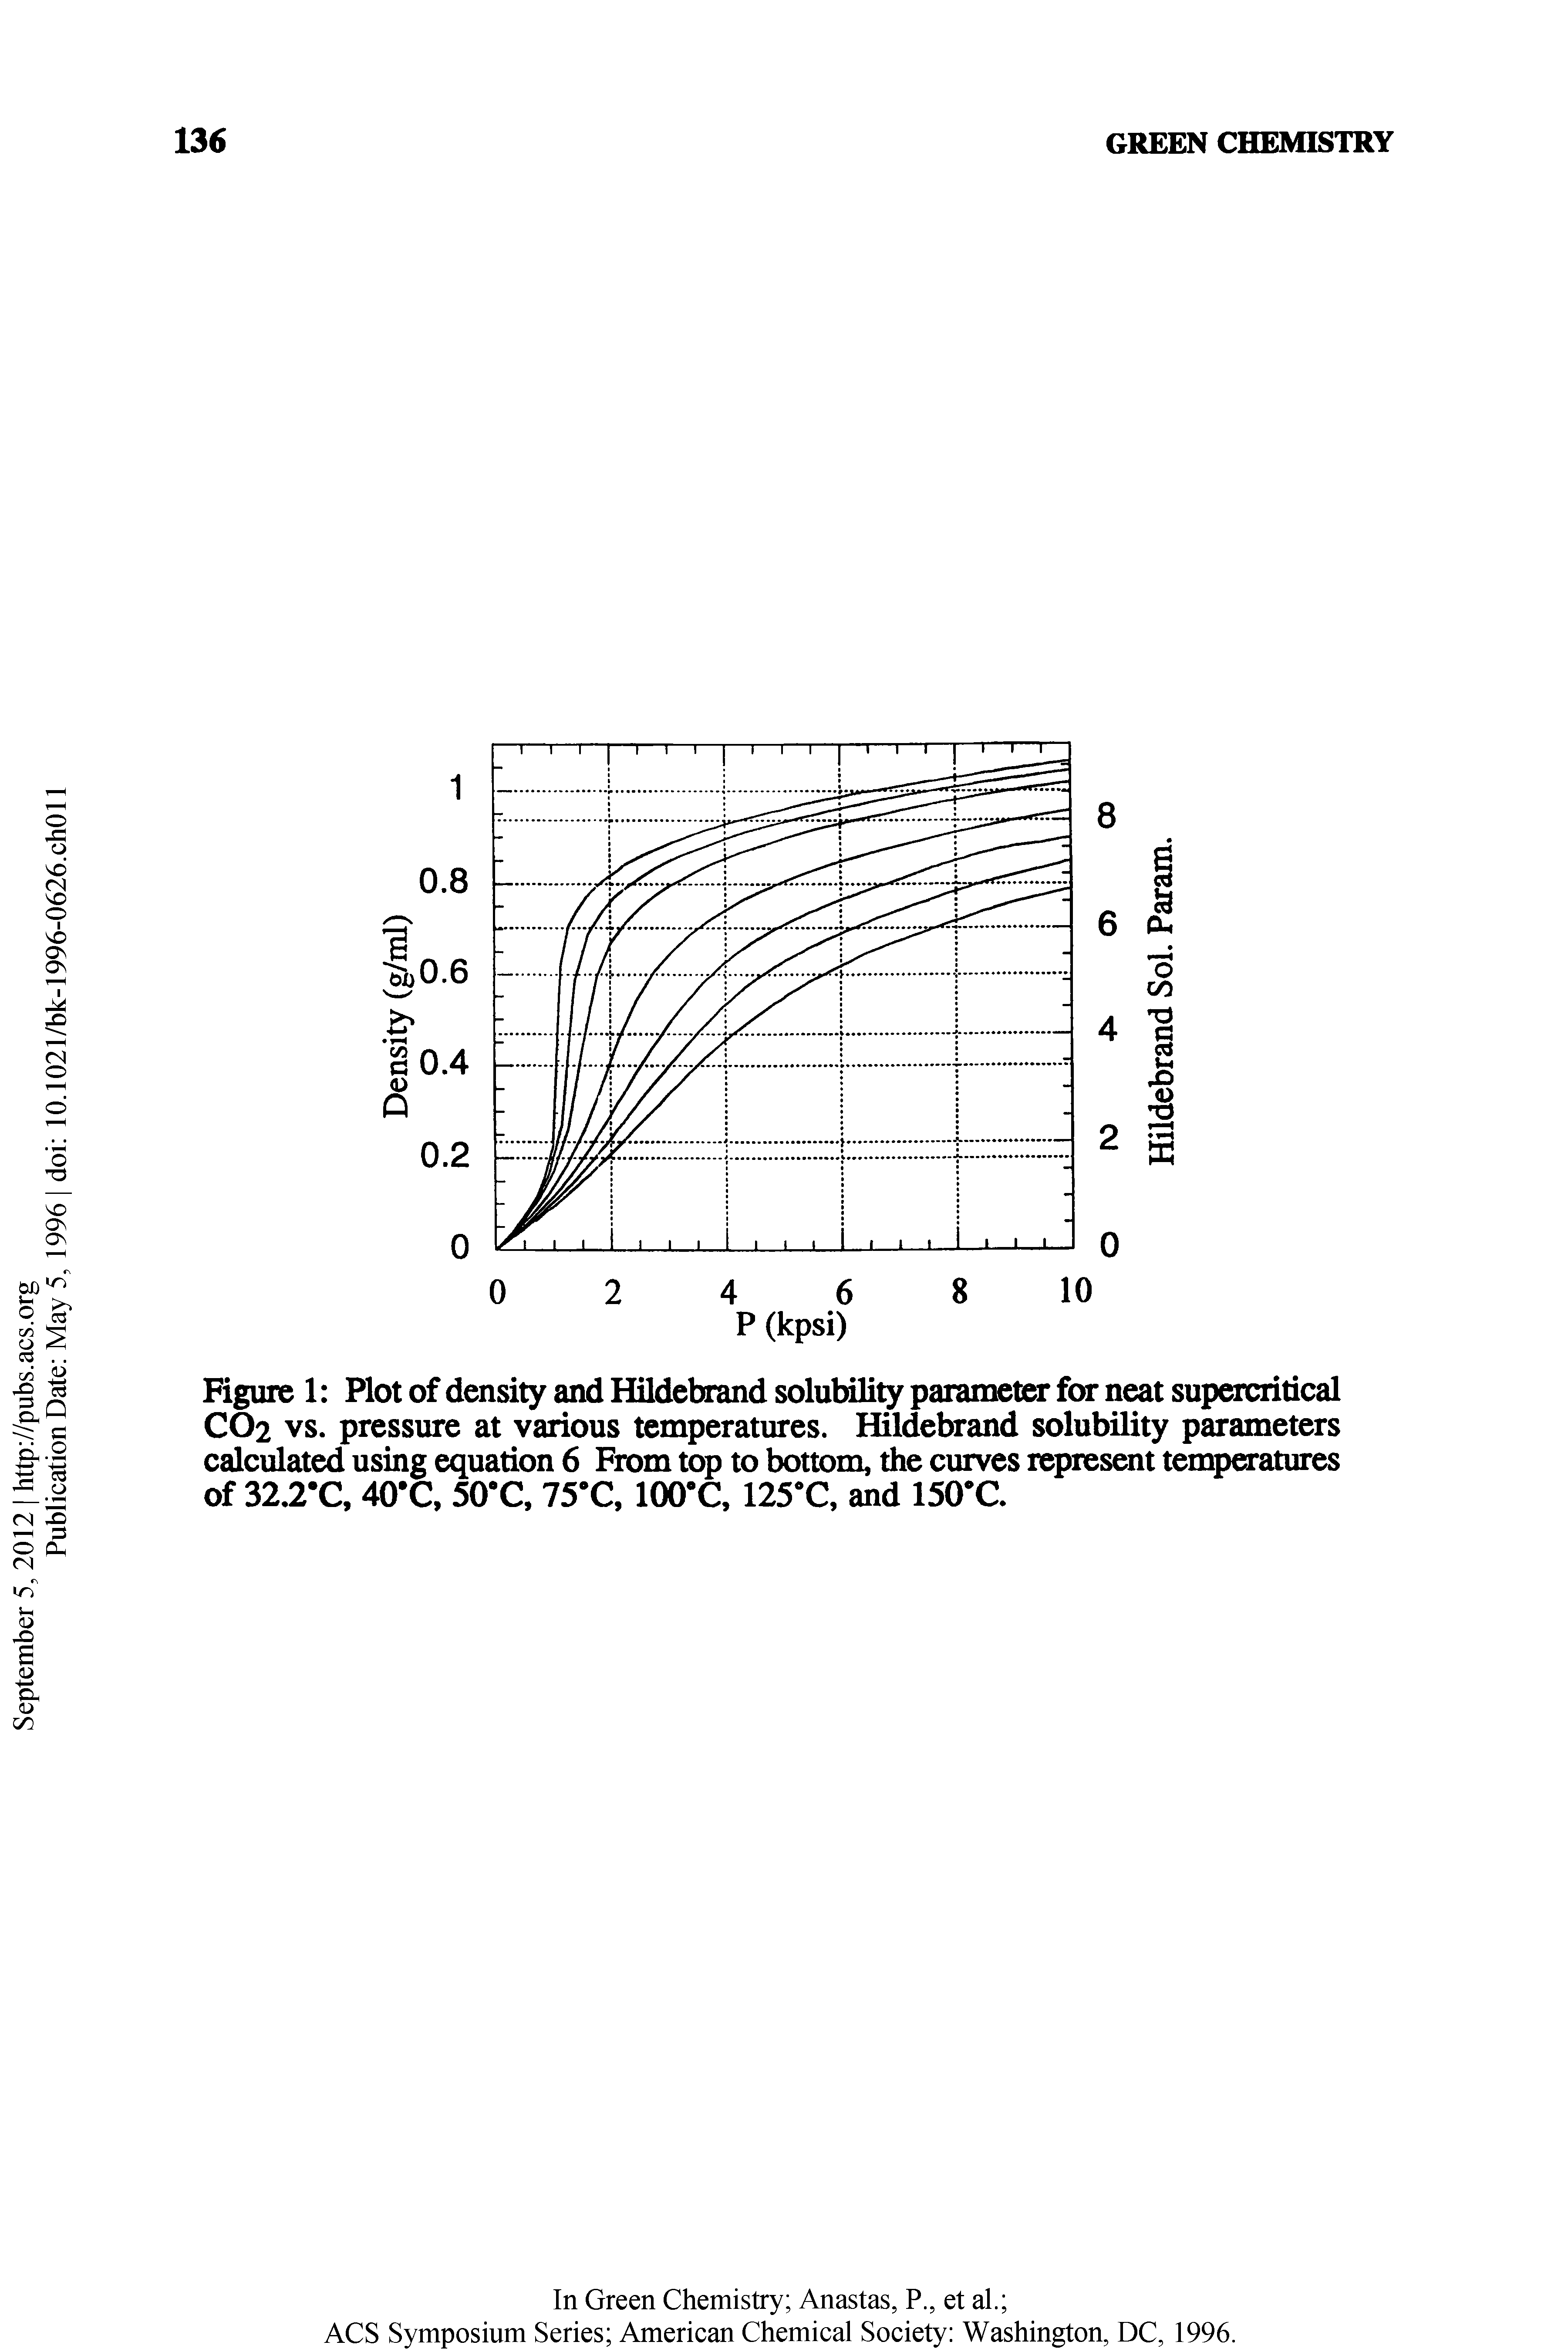 Figure 1 Plotof density and Hildebrand solubility parameter for neat supercritical CO2 vs. pressure at various temperatures. Hildebrand solubility parameters calculated using equation 6 From top to bottom, the curves represent teinperatures of 32.2-C, 40 C, 50 C, 75 C, lOO C, 125X, and 150 C...